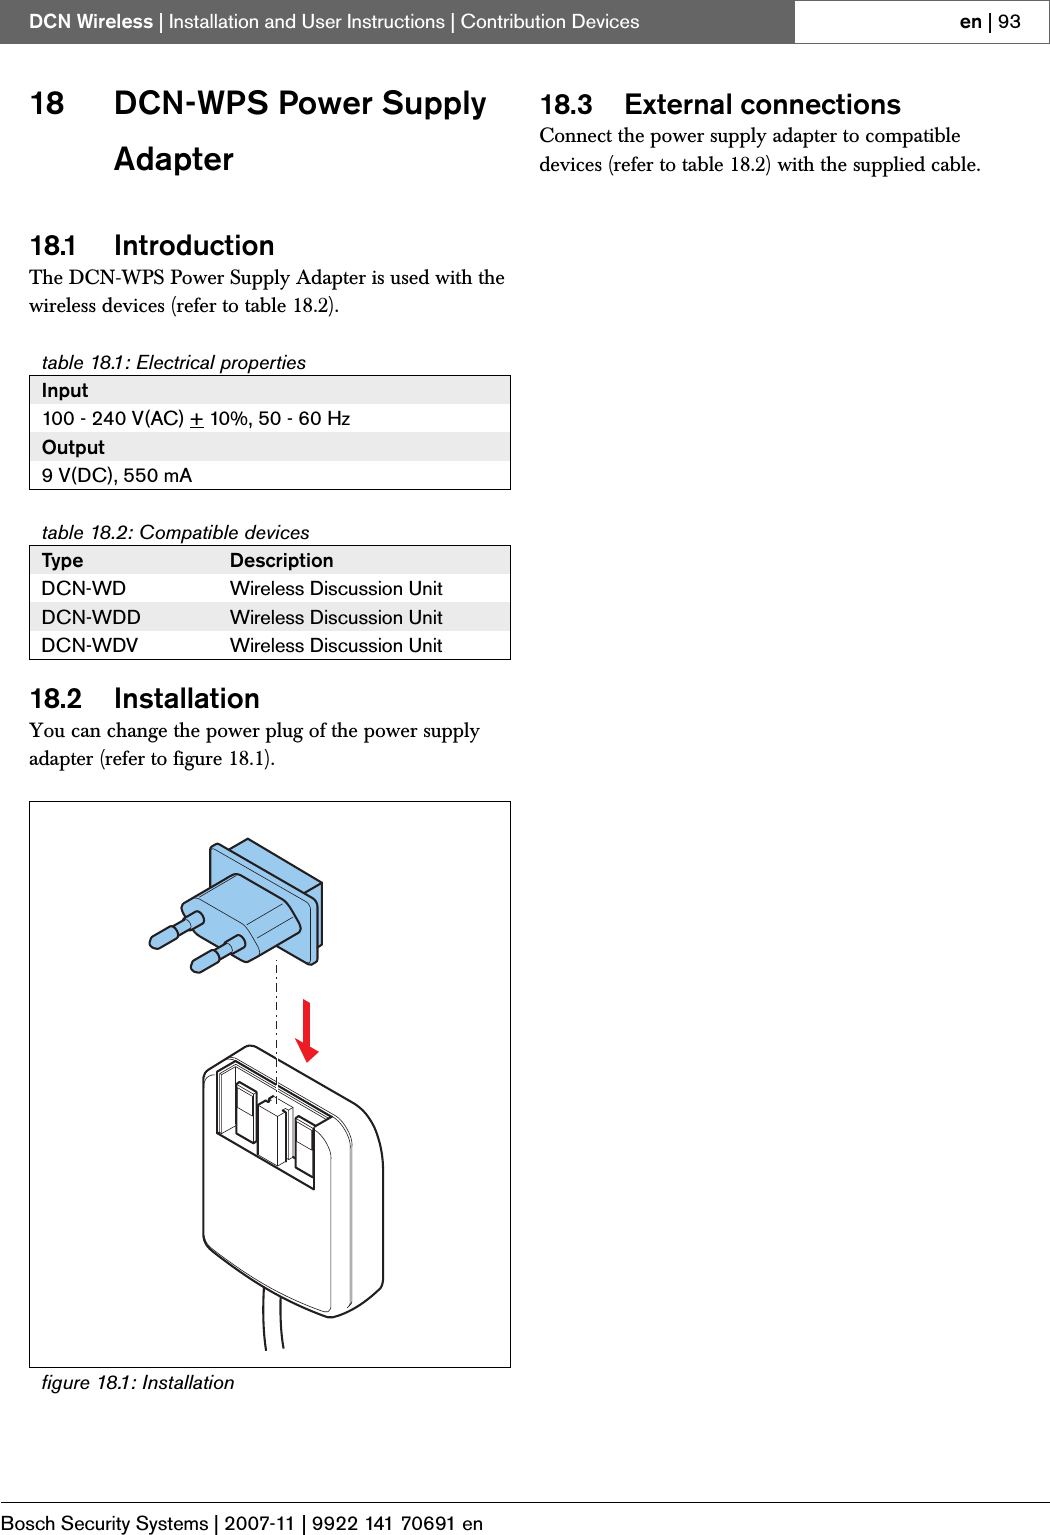 Bosch Security Systems | 2007-11 | 9922 141 70691 enDCN Wireless | Installation and User Instructions | Contribution Devices en | 9318 DCN-WPS Power Supply Adapter18.1 IntroductionThe DCN-WPS Power Supply Adapter is used with the wireless devices (refer to table 18.2).18.2 InstallationYou can change the power plug of the power supply adapter (refer to figure 18.1).18.3 External connectionsConnect the power supply adapter to compatible devices (refer to table 18.2) with the supplied cable.table 18.1: Electrical propertiesInput100 - 240 V(AC) + 10%, 50 - 60 HzOutput9 V(DC), 550 mAtable 18.2: Compatible devicesType DescriptionDCN-WD Wireless Discussion UnitDCN-WDD Wireless Discussion UnitDCN-WDV Wireless Discussion Unitfigure 18.1: Installation